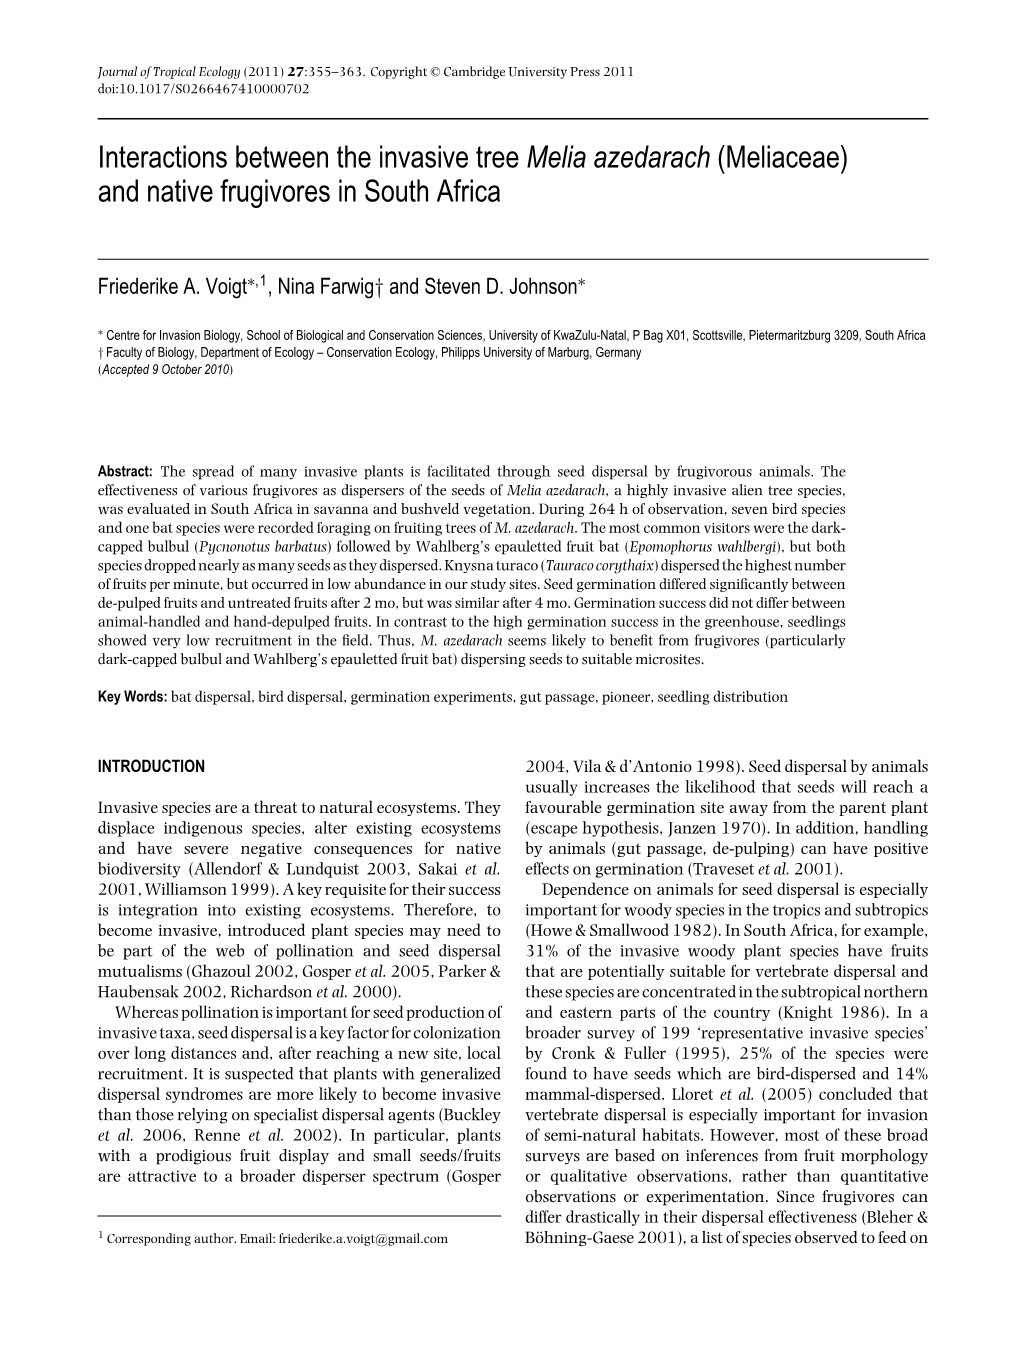 Interactions Between the Invasive Tree Melia Azedarach (Meliaceae) and Native Frugivores in South Africa